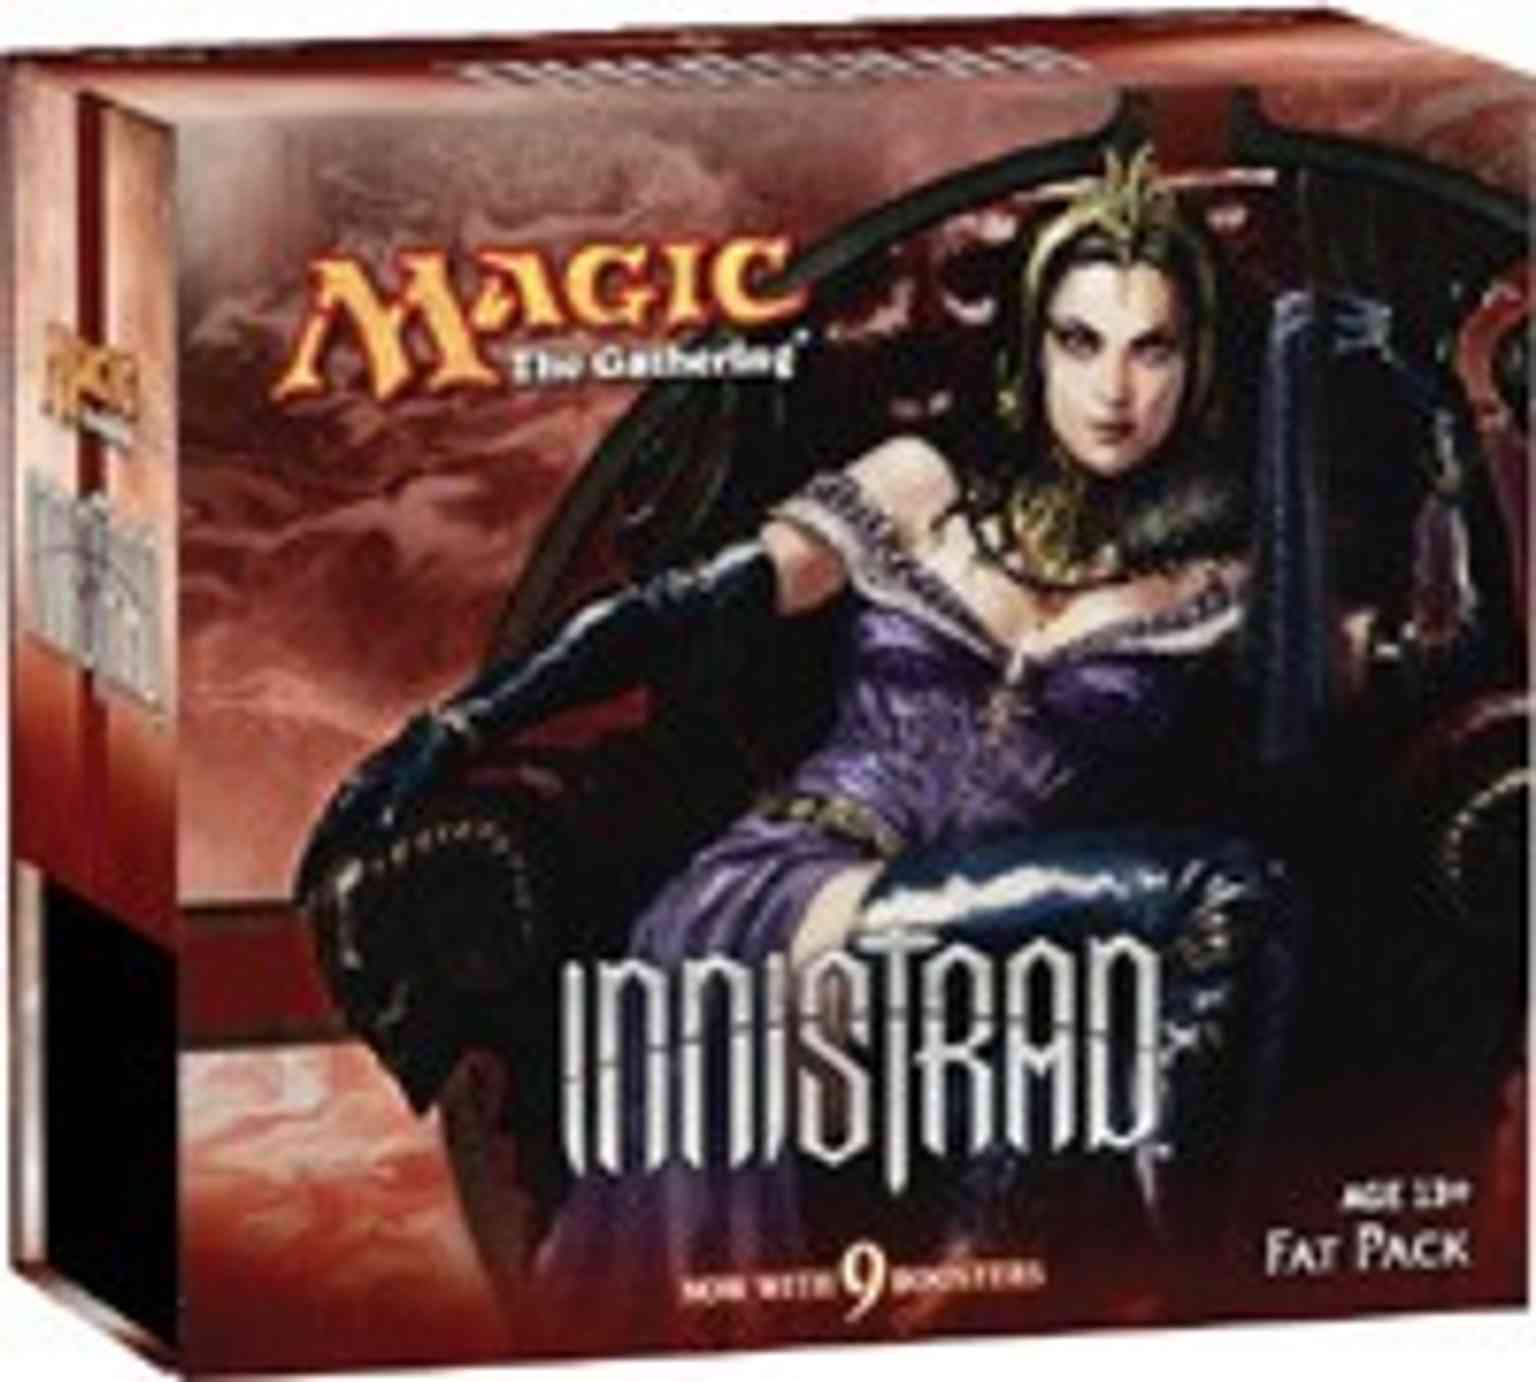 Innistrad - Fat Pack magic card front